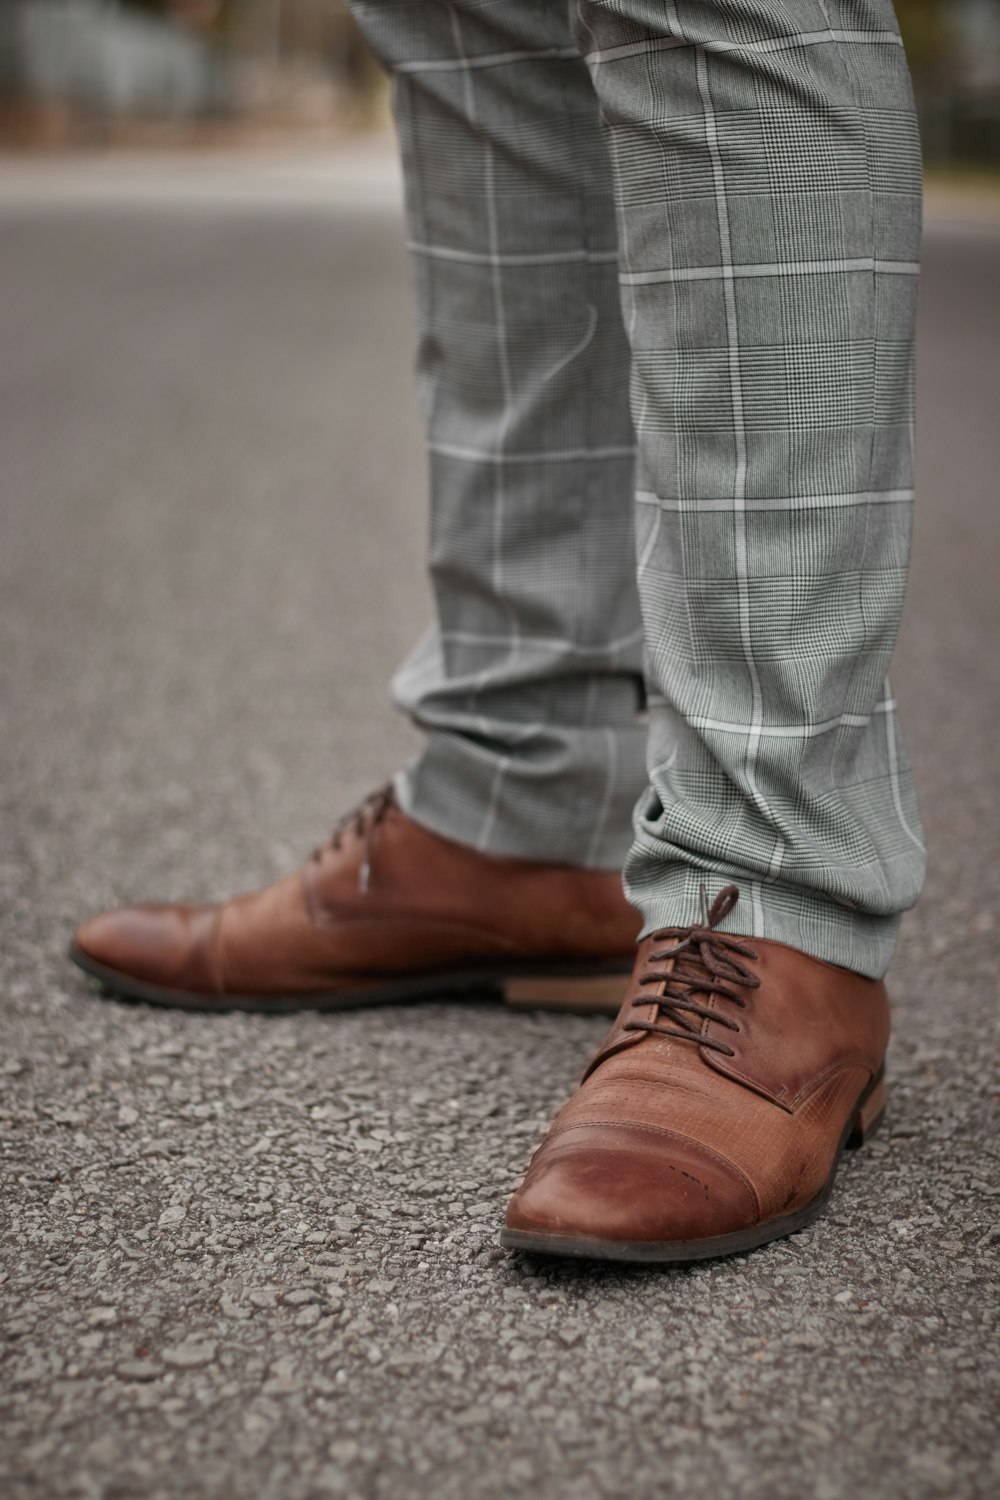 person in gray denim jeans and brown leather shoes